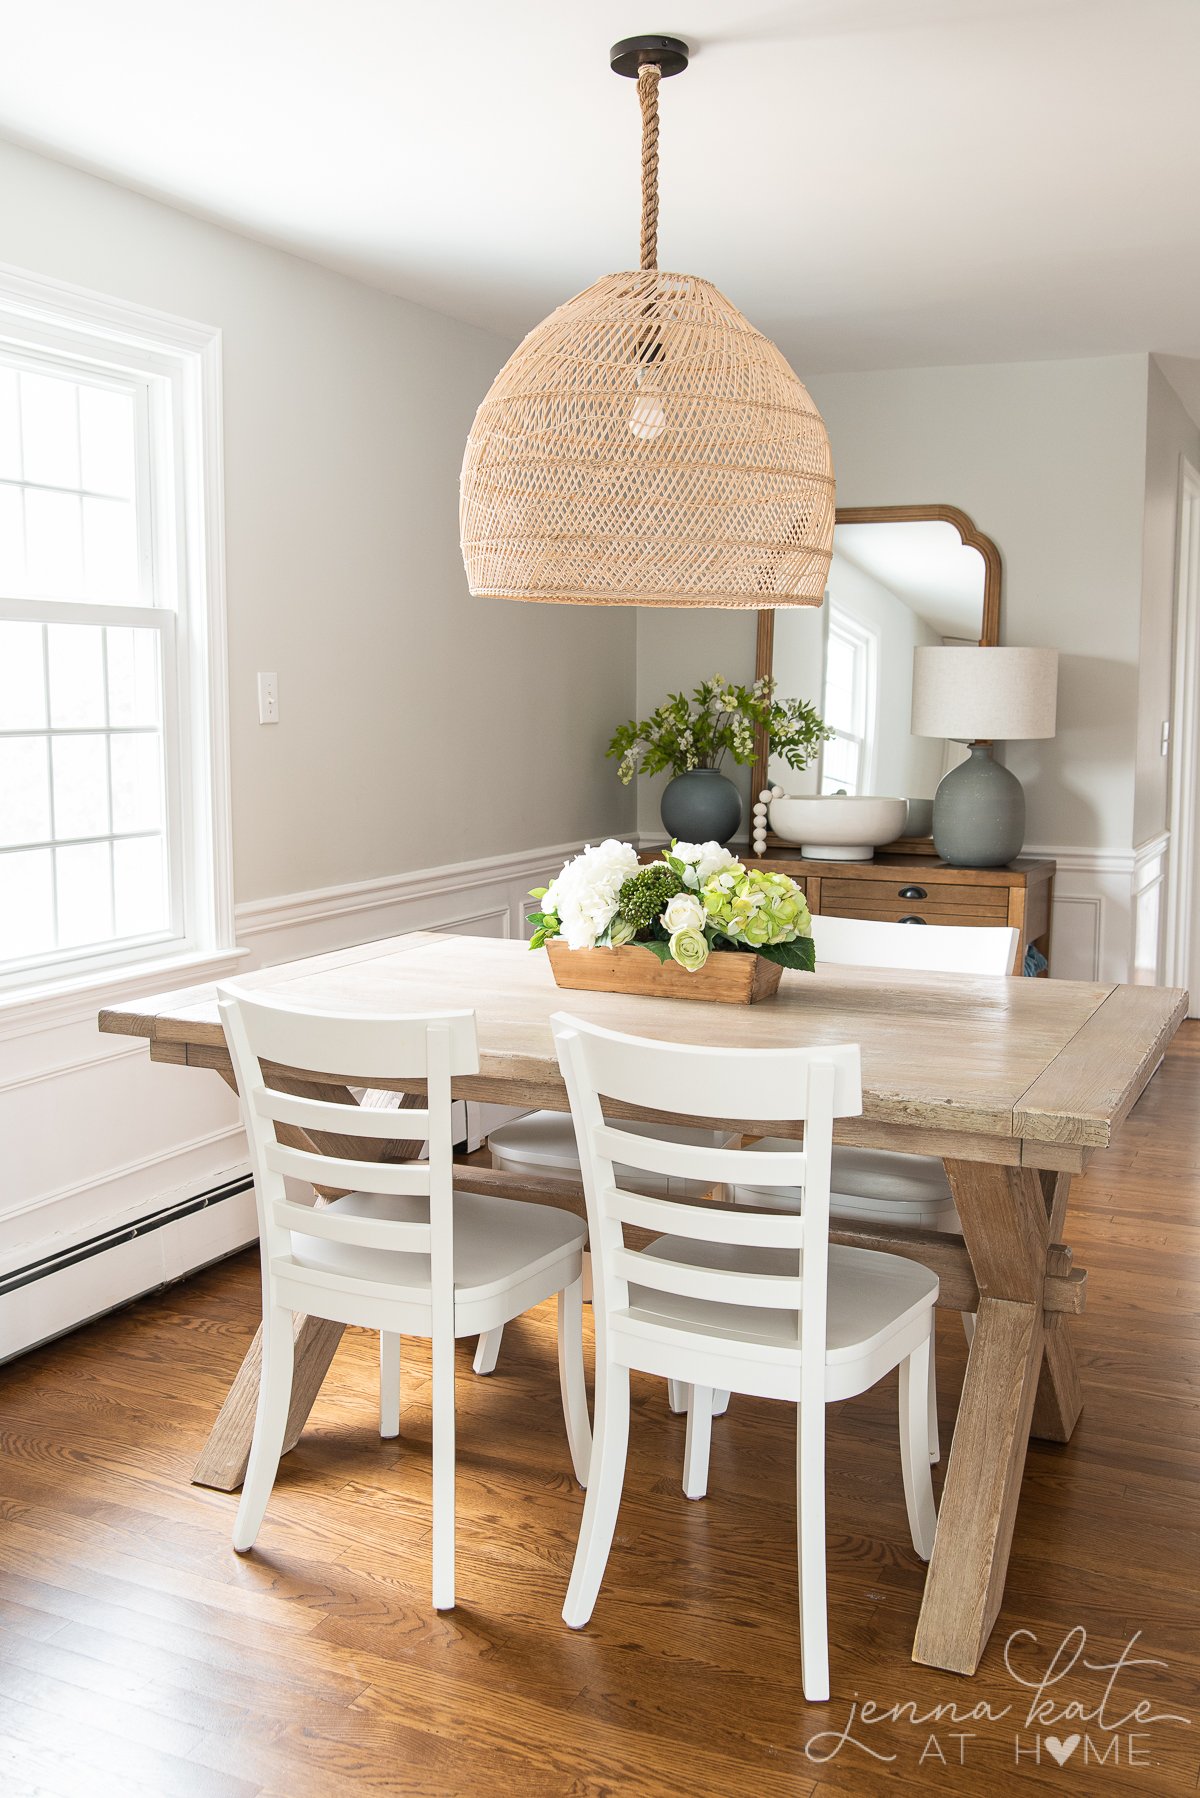 Dining space with wooden table, white chairs and rattan basket pendant. The wainscoting is painted pure white.